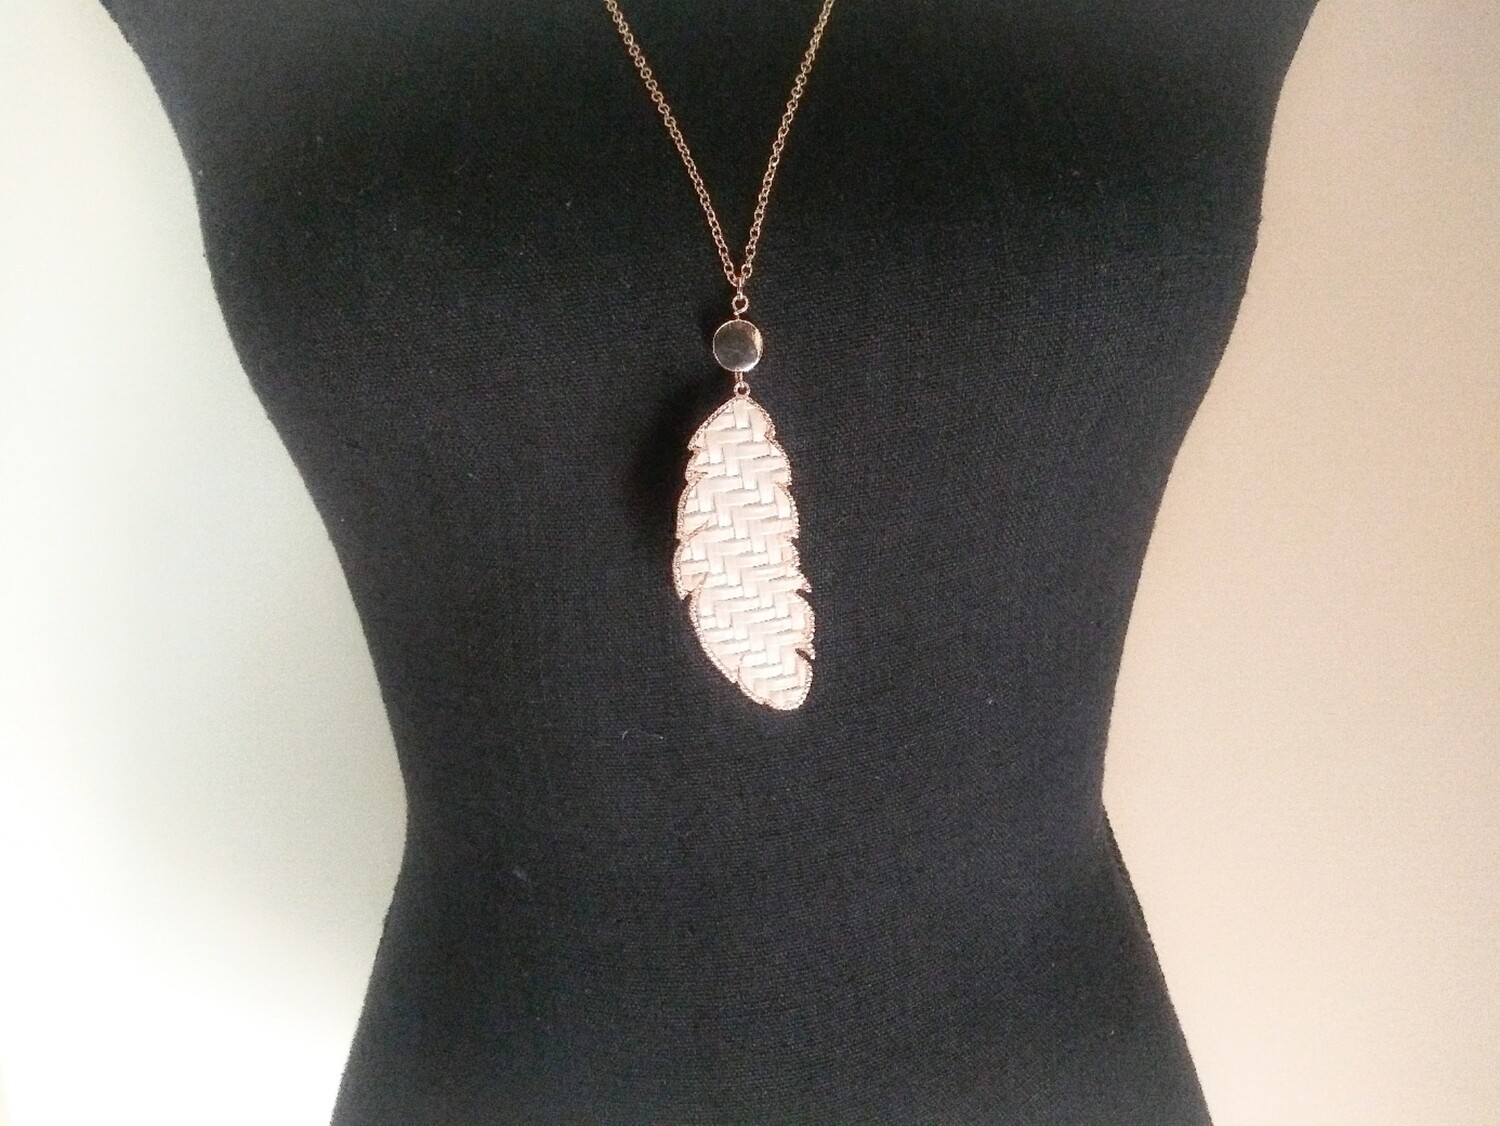 Vegan leather feather necklace